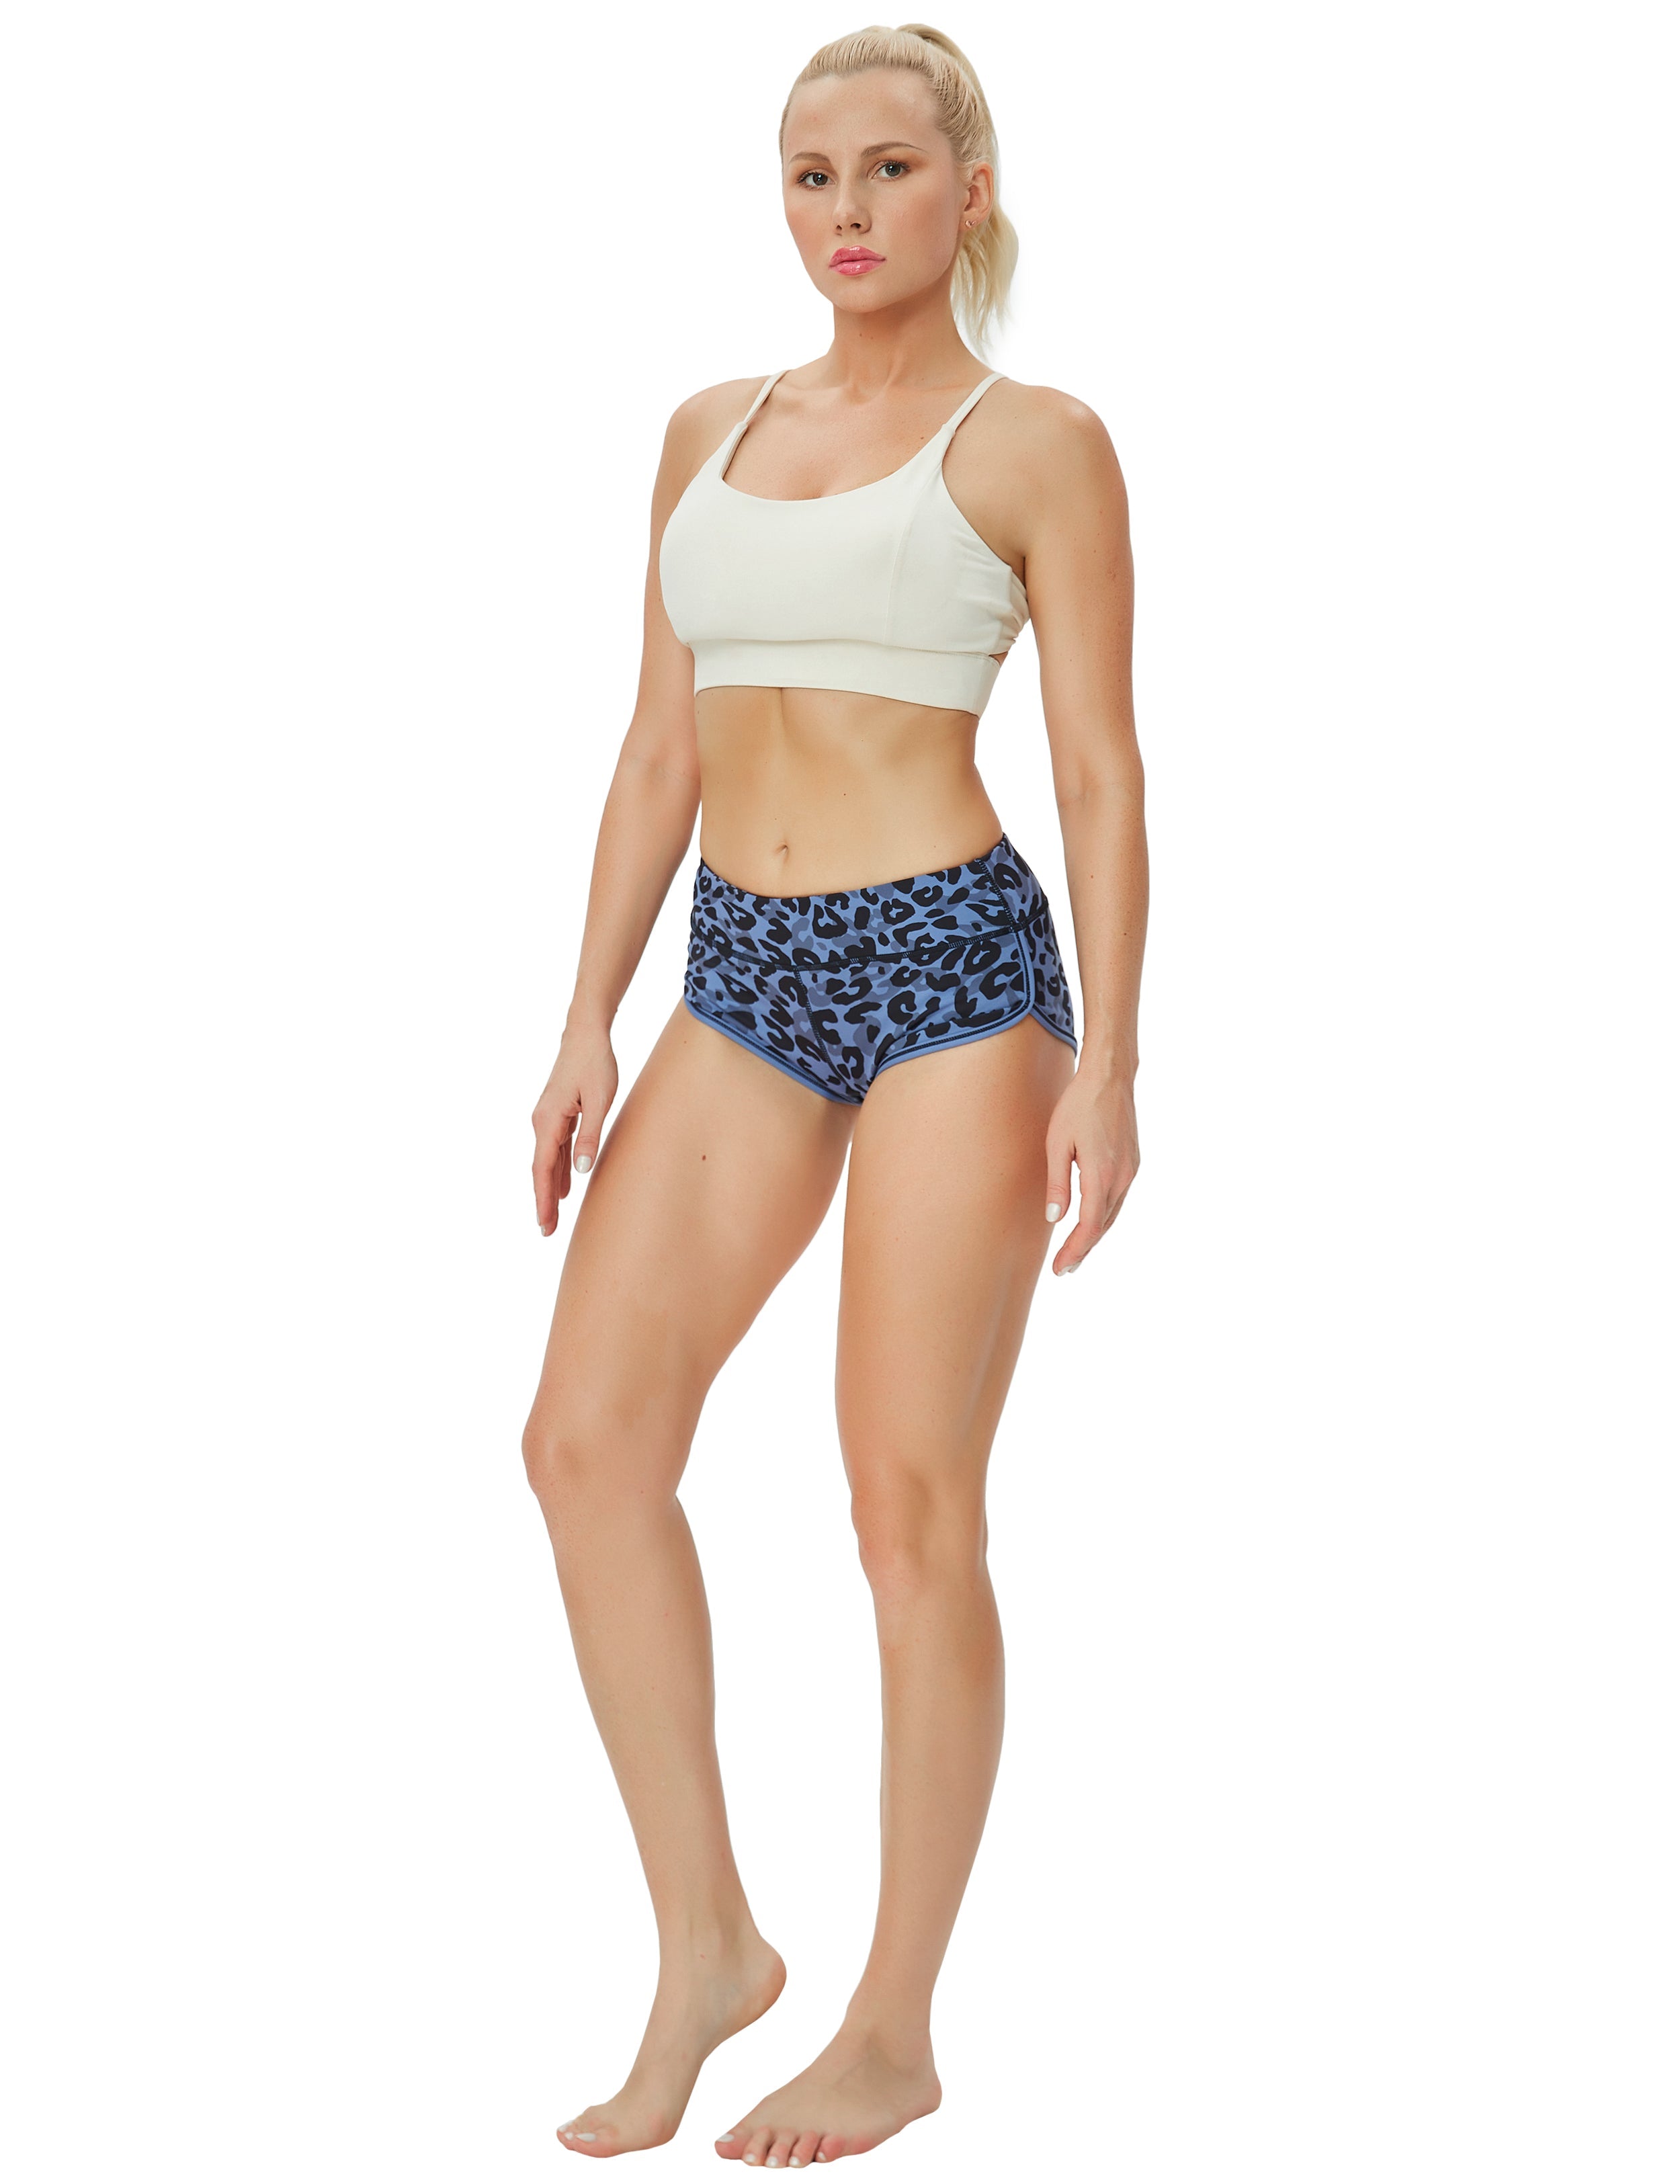 Printed Booty Running Shorts navy_leopard Sleek, soft, smooth and totally comfortable: our newest sexy style is here. Softest-ever fabric High elasticity High density 4-way stretch Fabric doesn't attract lint easily No see-through Moisture-wicking Machine wash 78% Polyester, 22% Spandex